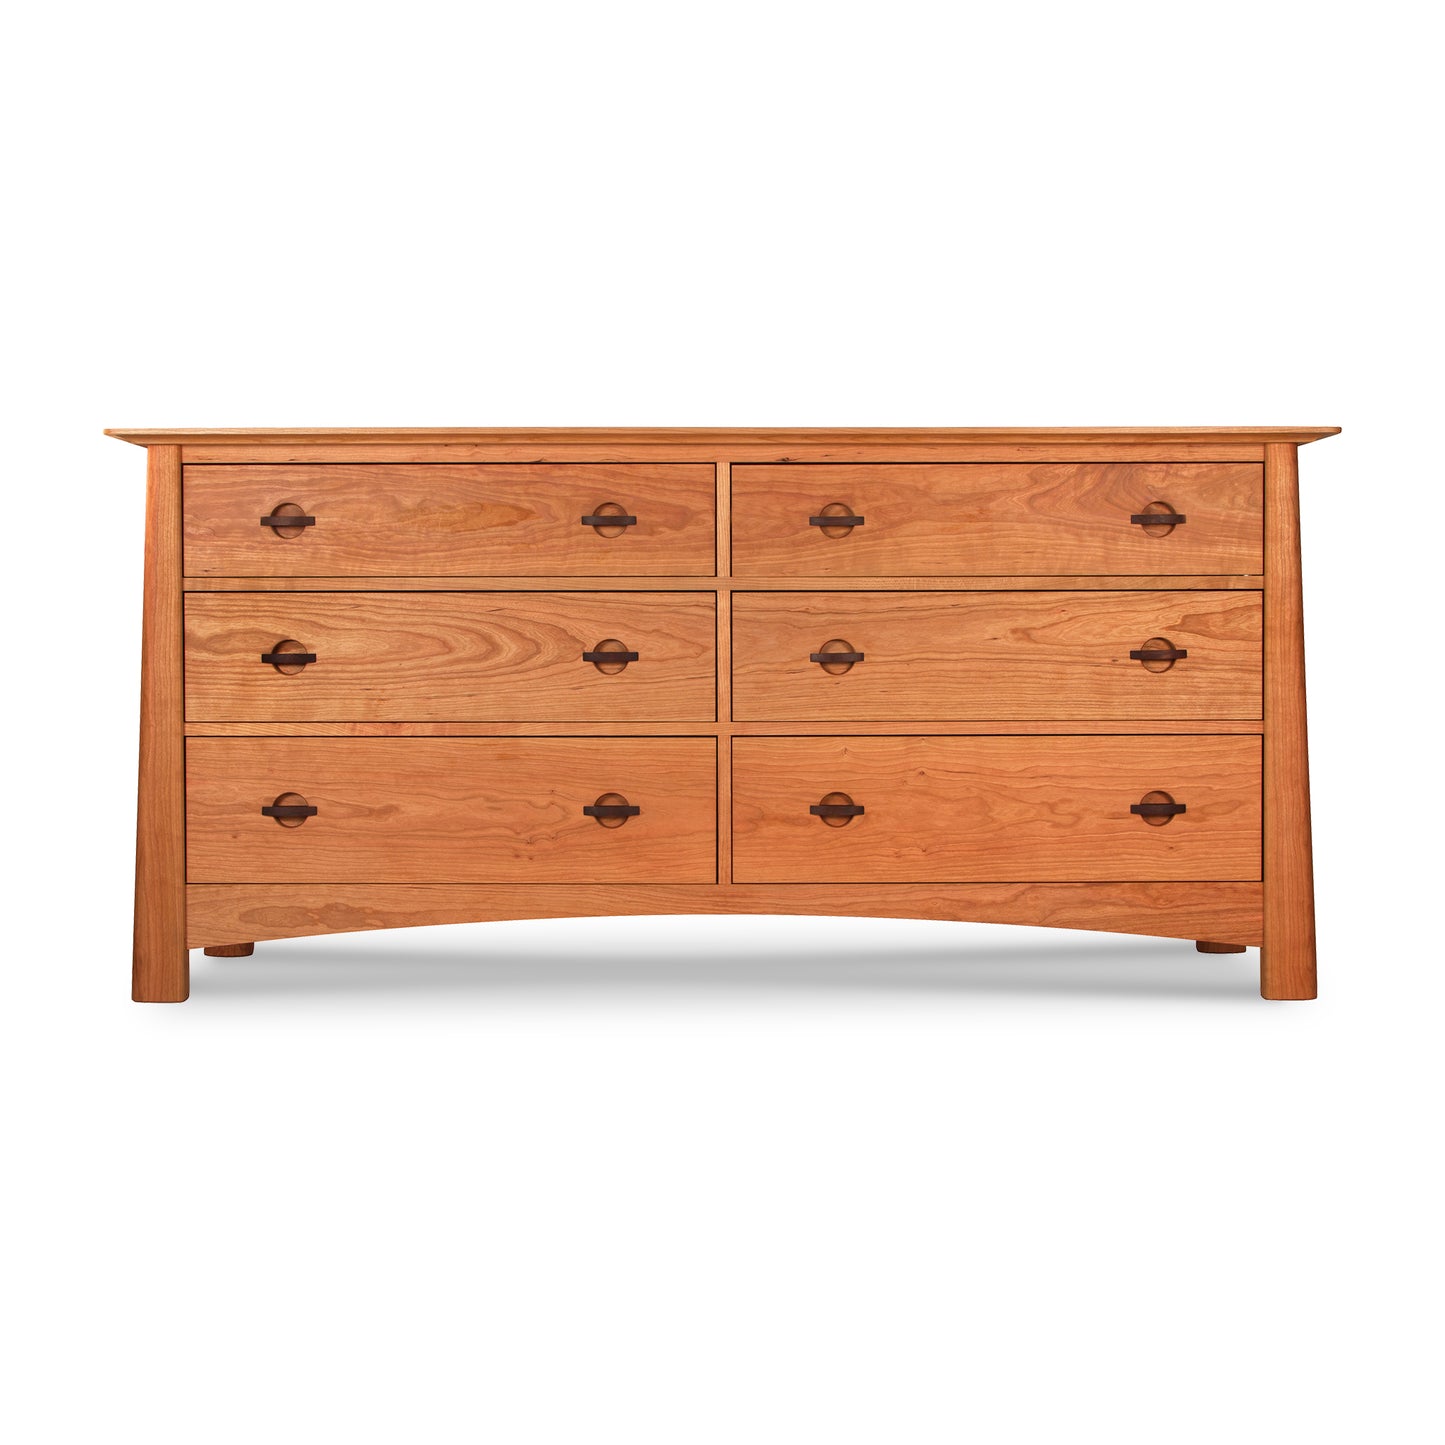 Cherry Moon 6-Drawer Dresser by Maple Corner Woodworks features six spacious drawers in two columns of three. This high-quality American made furniture piece showcases a stunning natural cherry wood finish and durable circular metal handles. Perfect for adding elegant storage to any bedroom, this solid wood dresser stands on four sturdy short legs. Ideal for those searching for cherry wood furniture and Vermont made furniture.